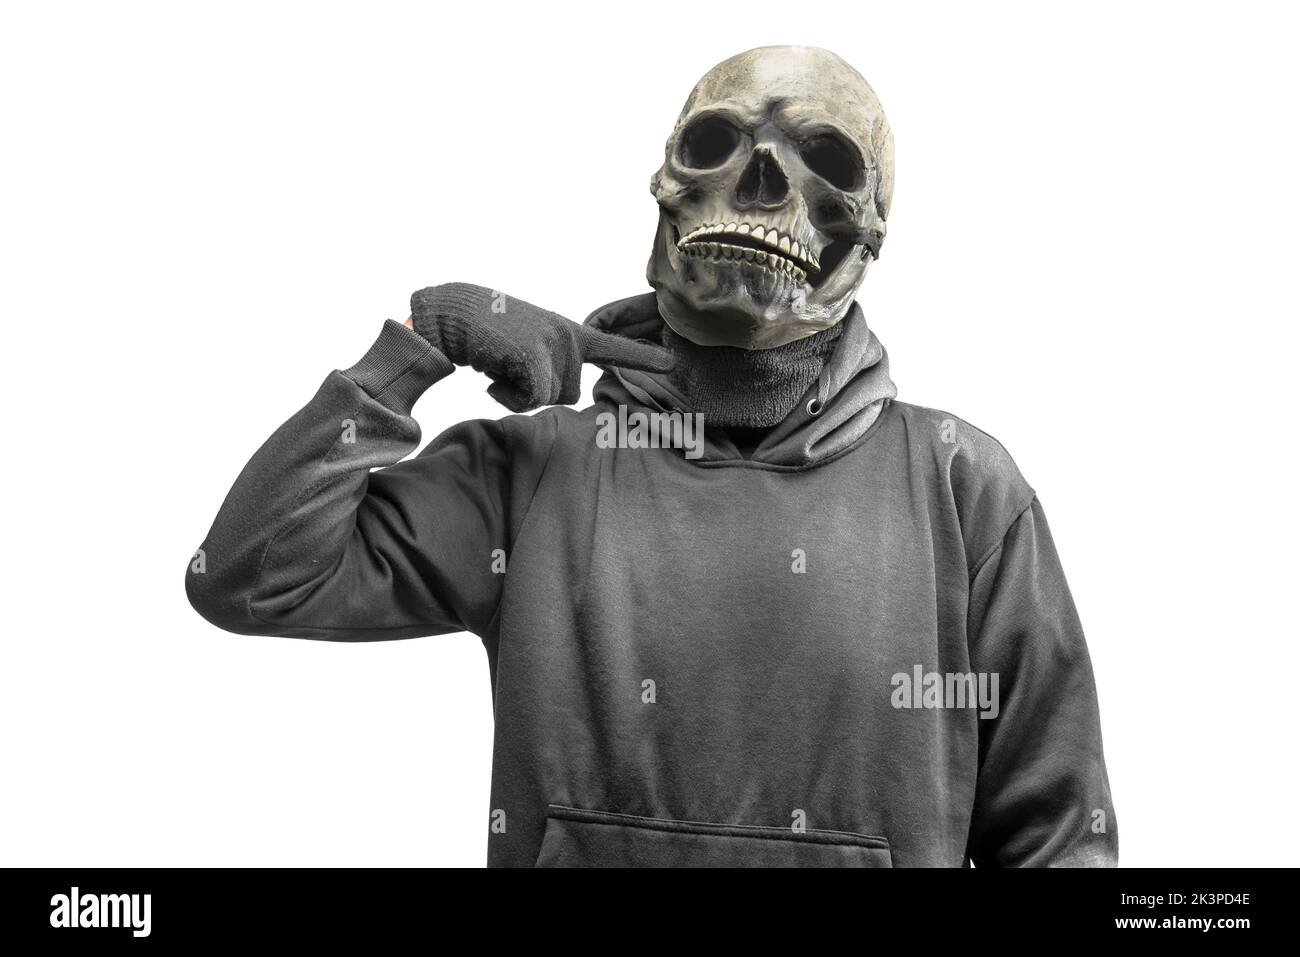 Man with a skull head costume for Halloween isolated over white background Stock Photo